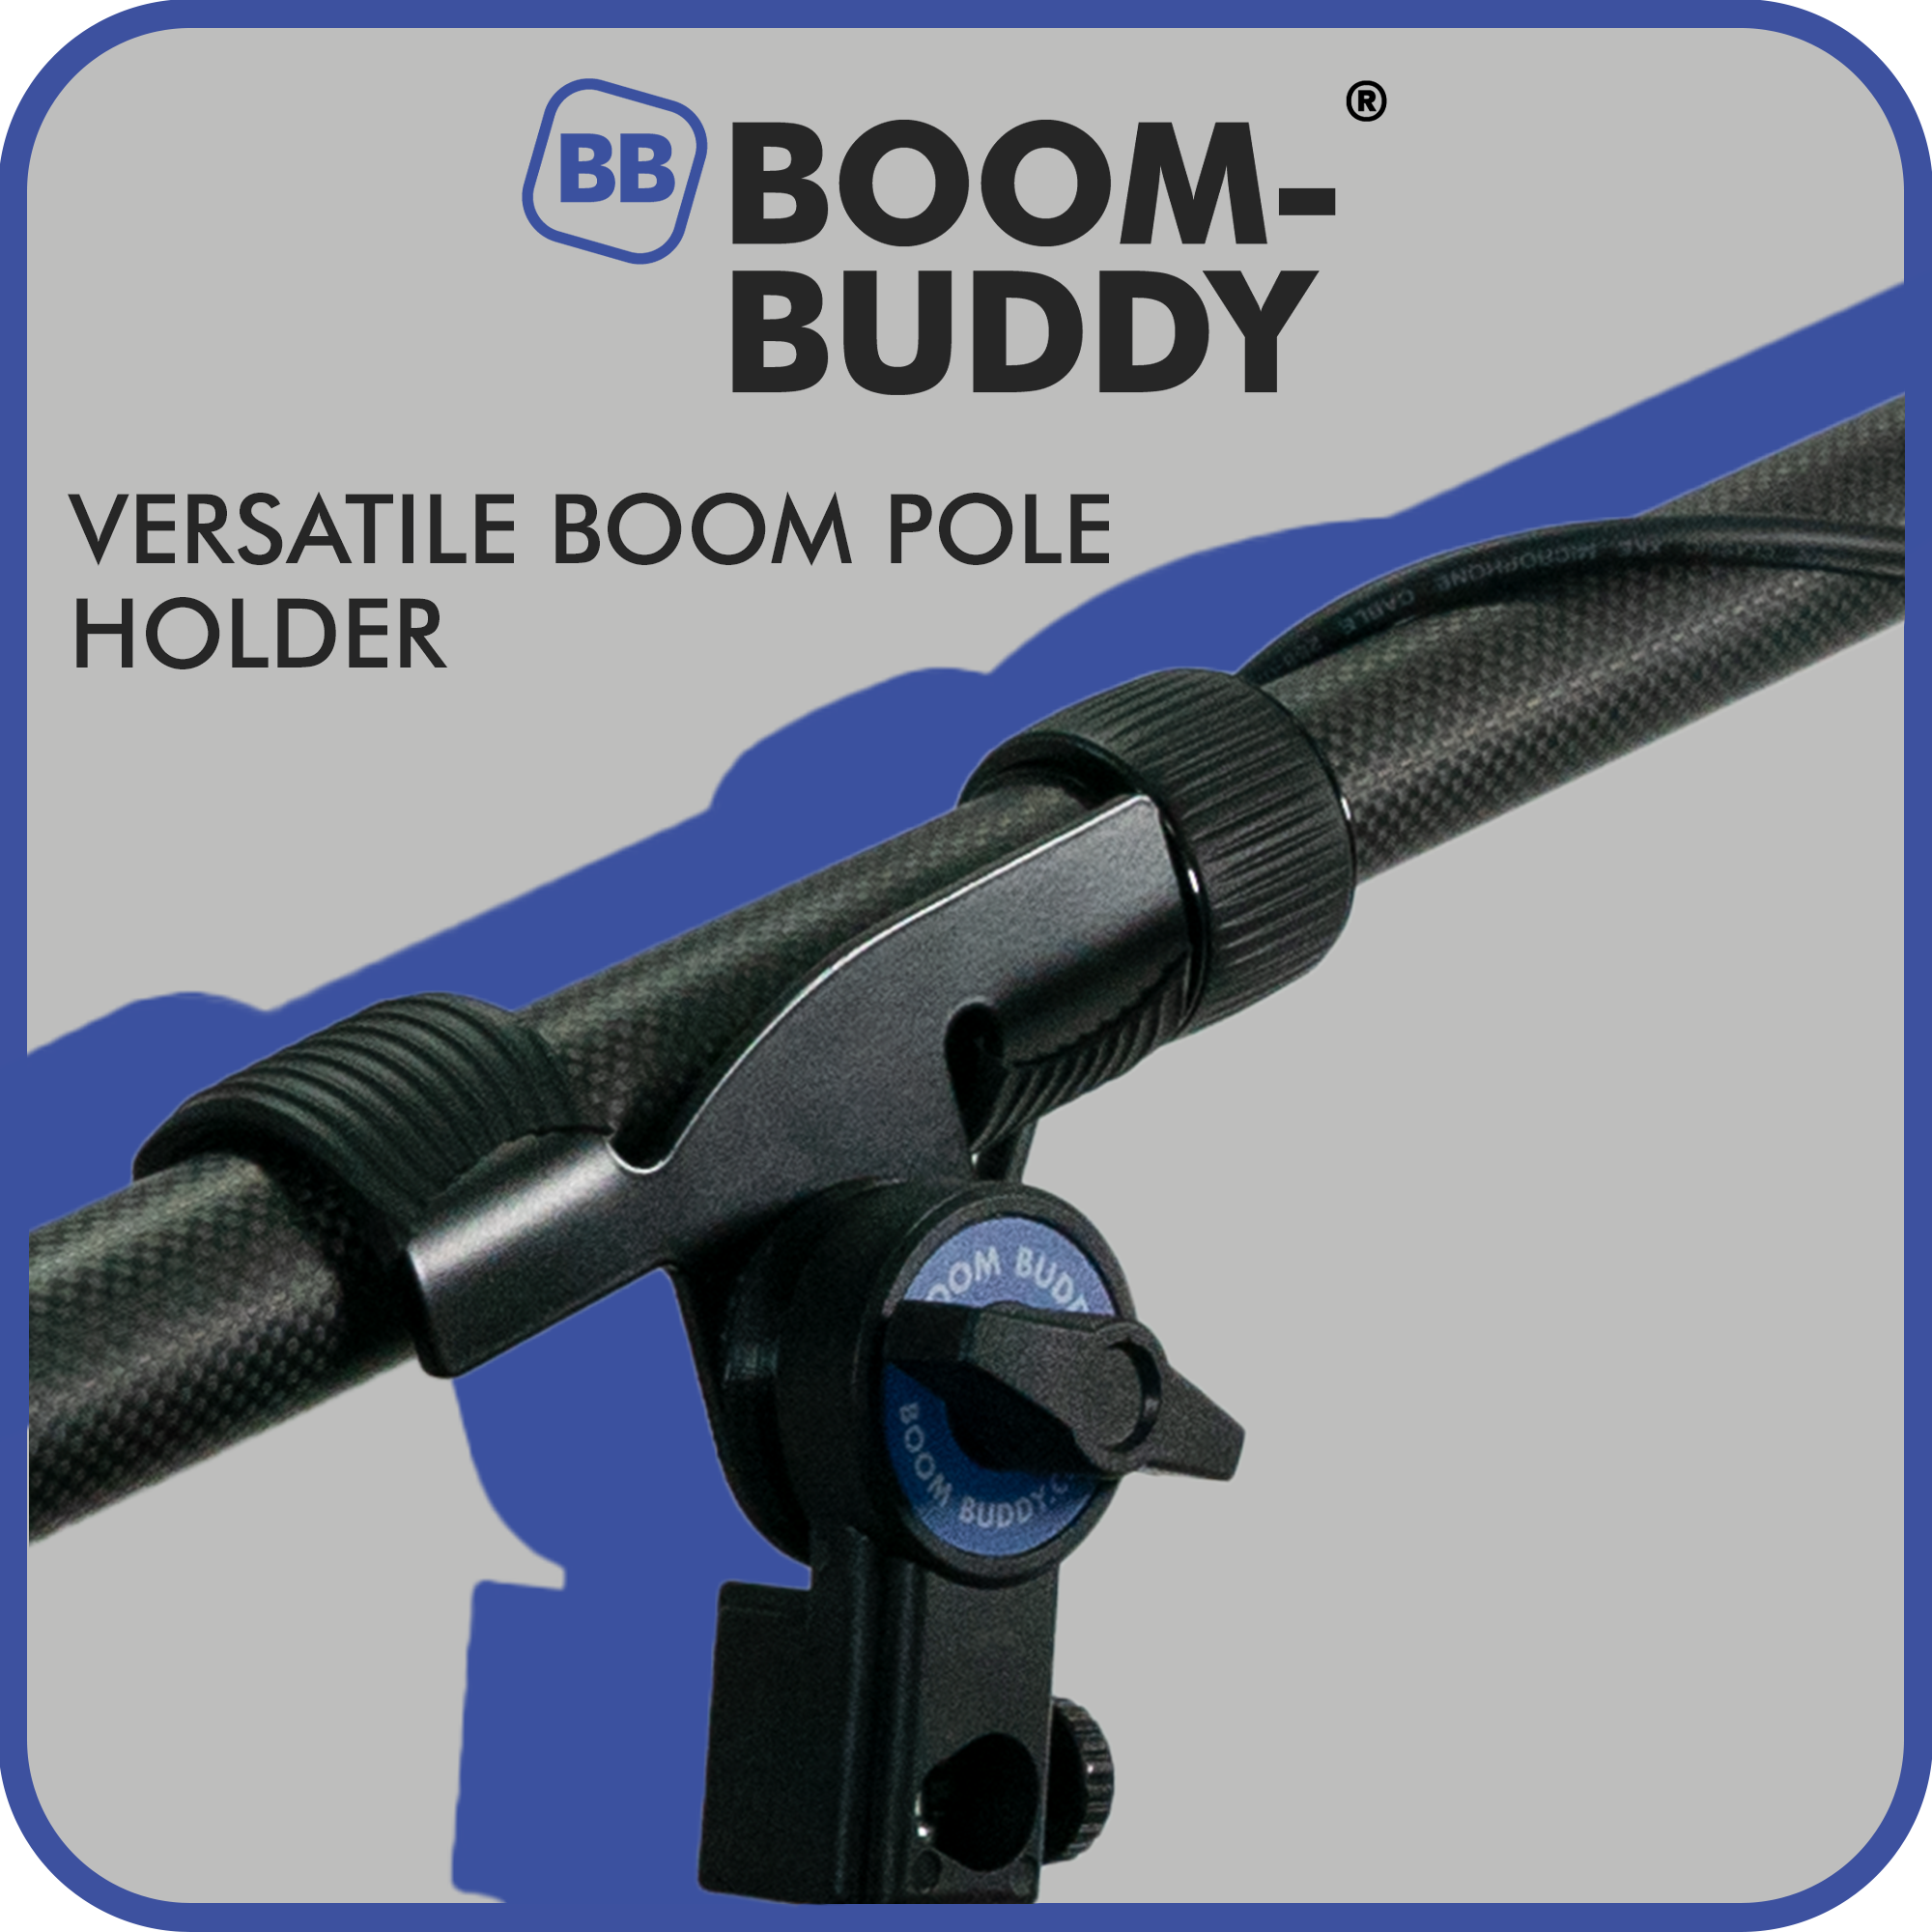 Boom-Buddy Boom Holder Product Image showing the product in use. Displaying logo and title of product along side.